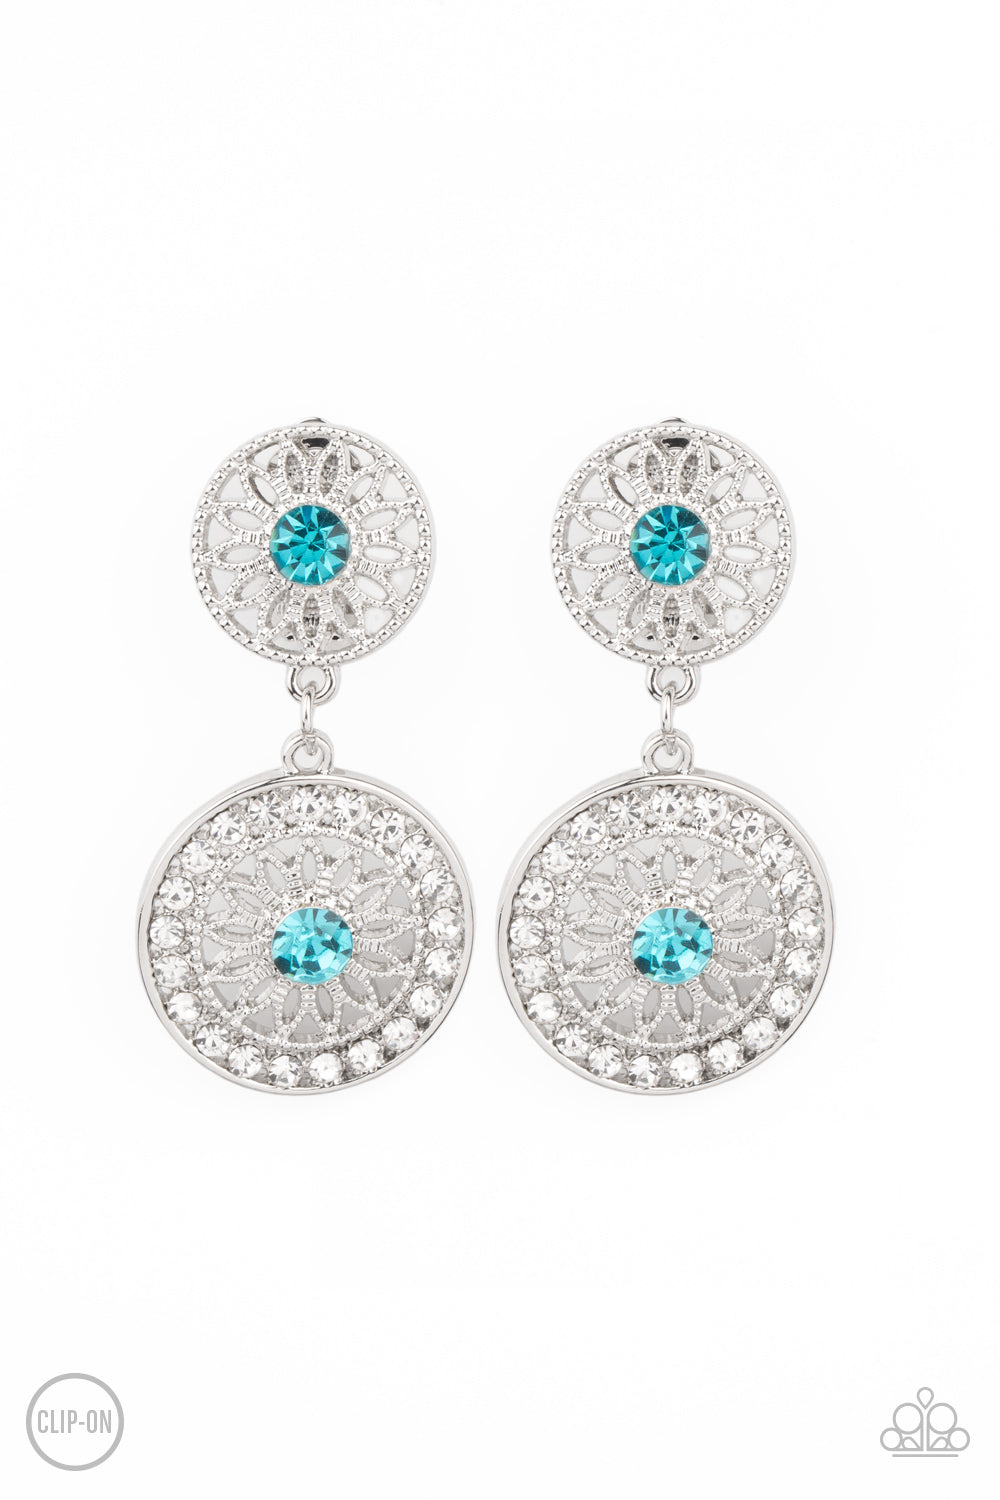 Life of The Garden Party Blue Clip-On Earring - Paparazzi Accessories.  Dotted with glittery blue rhinestone centers, shimmery silver floral frames link into a whimsical lure. The lower frame is bordered in glassy white rhinestones for a timeless finish. Earring attaches to a standard clip-on fitting.  ﻿All Paparazzi Accessories are lead free and nickel free!  Sold as one pair of clip-on earrings.